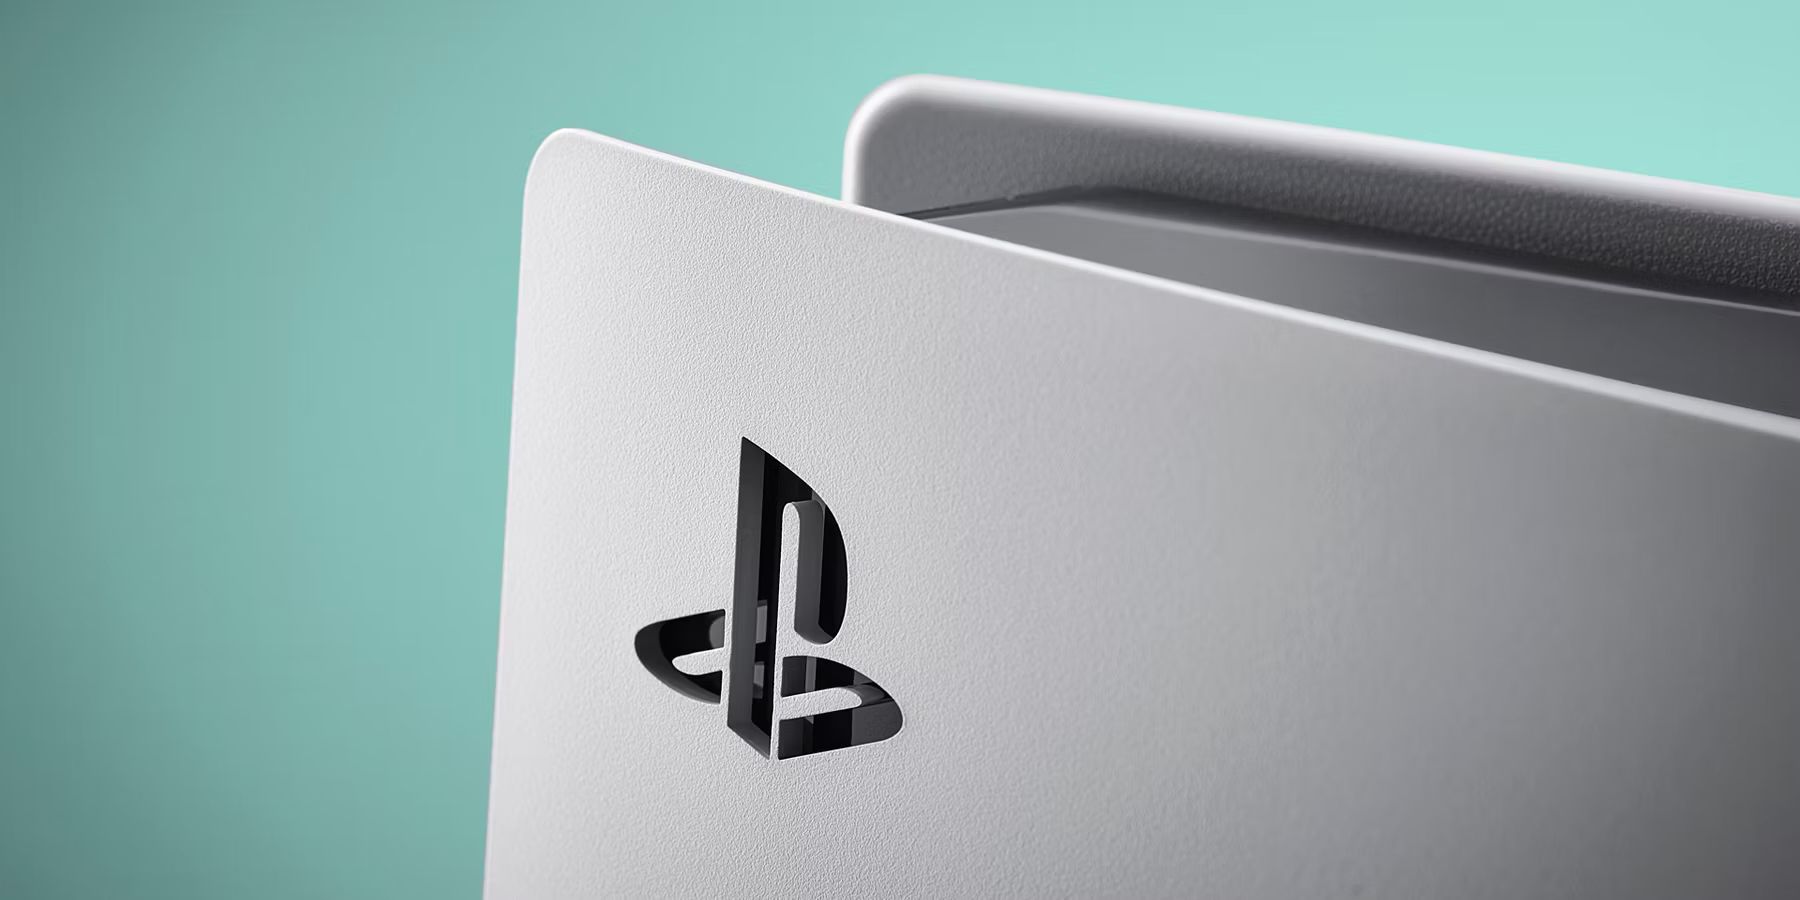 Sony PlayStation 5 Pro: Rumors and Leaks